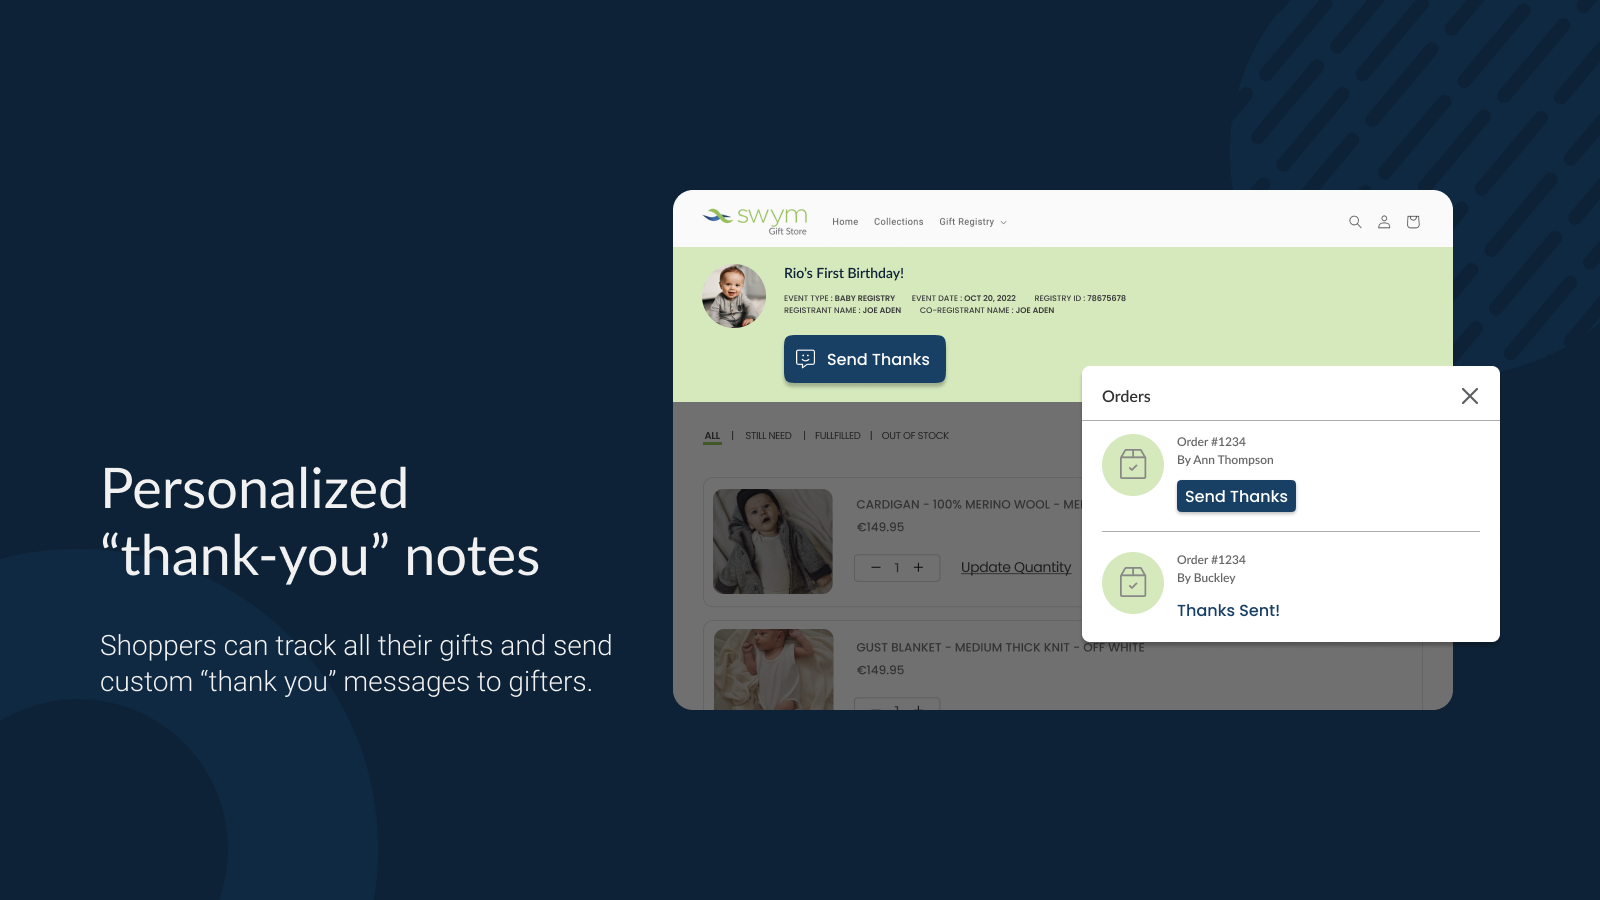 Users can send personalized thank you notes